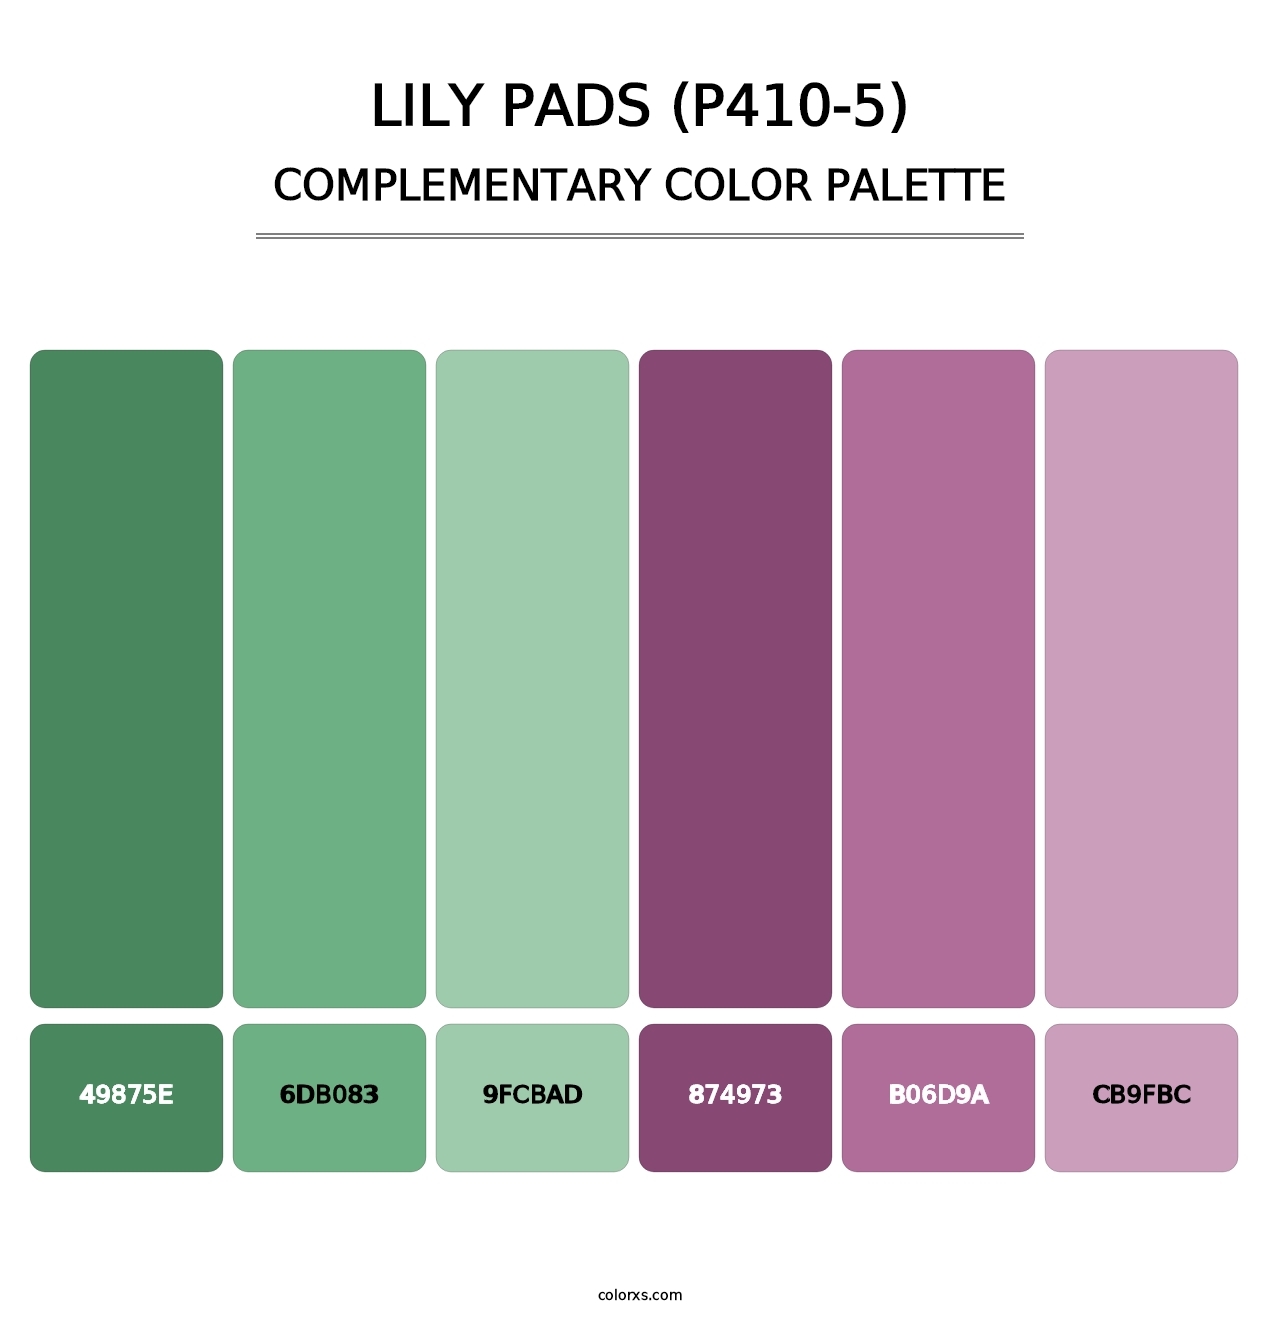 Lily Pads (P410-5) - Complementary Color Palette